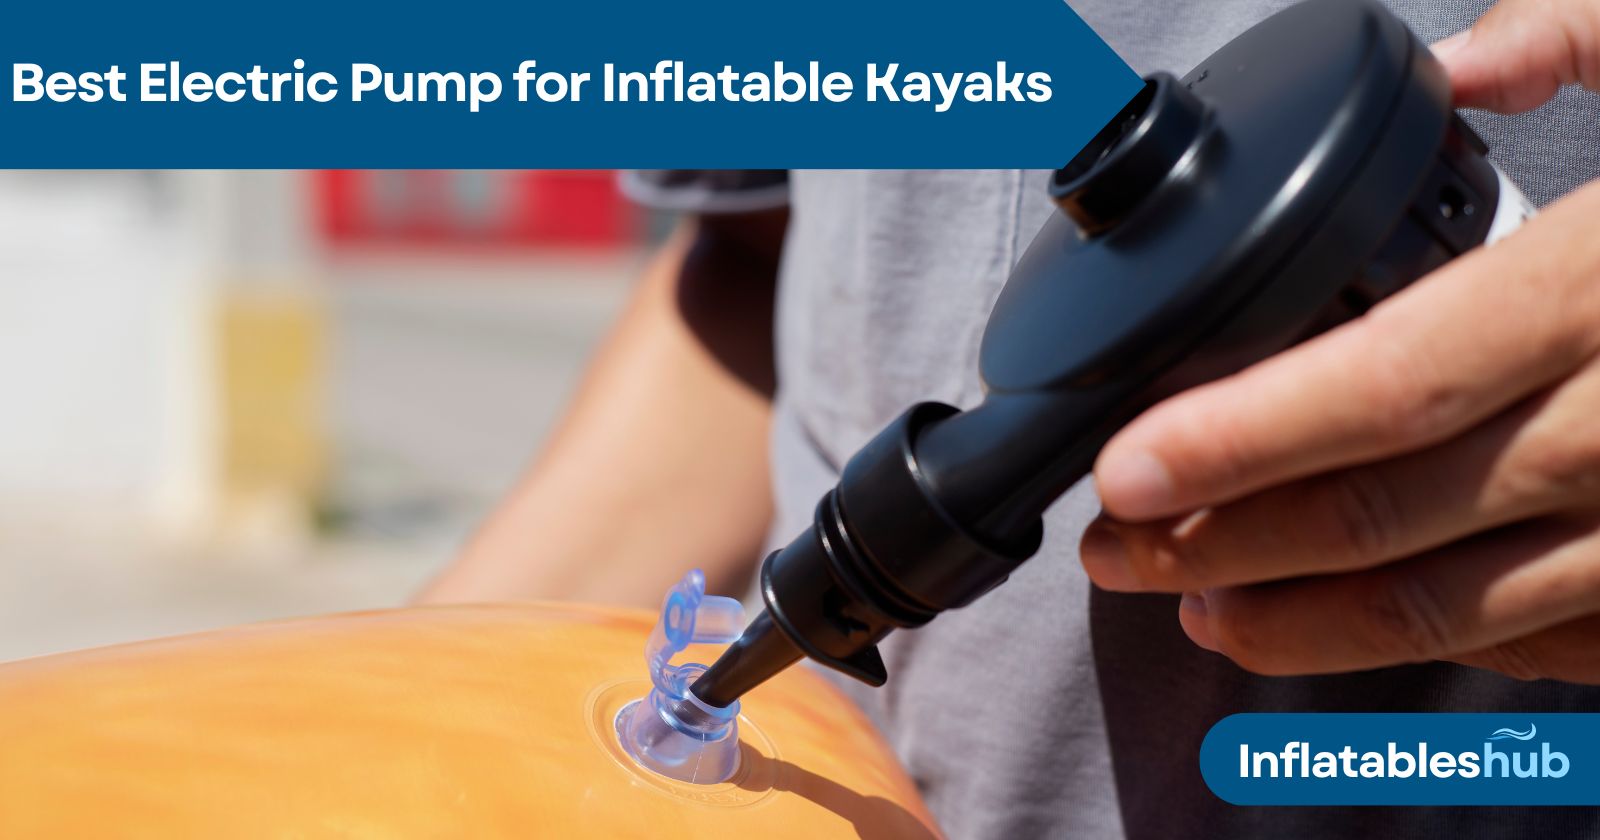 Best Electric Pump for Inflatable Kayaks